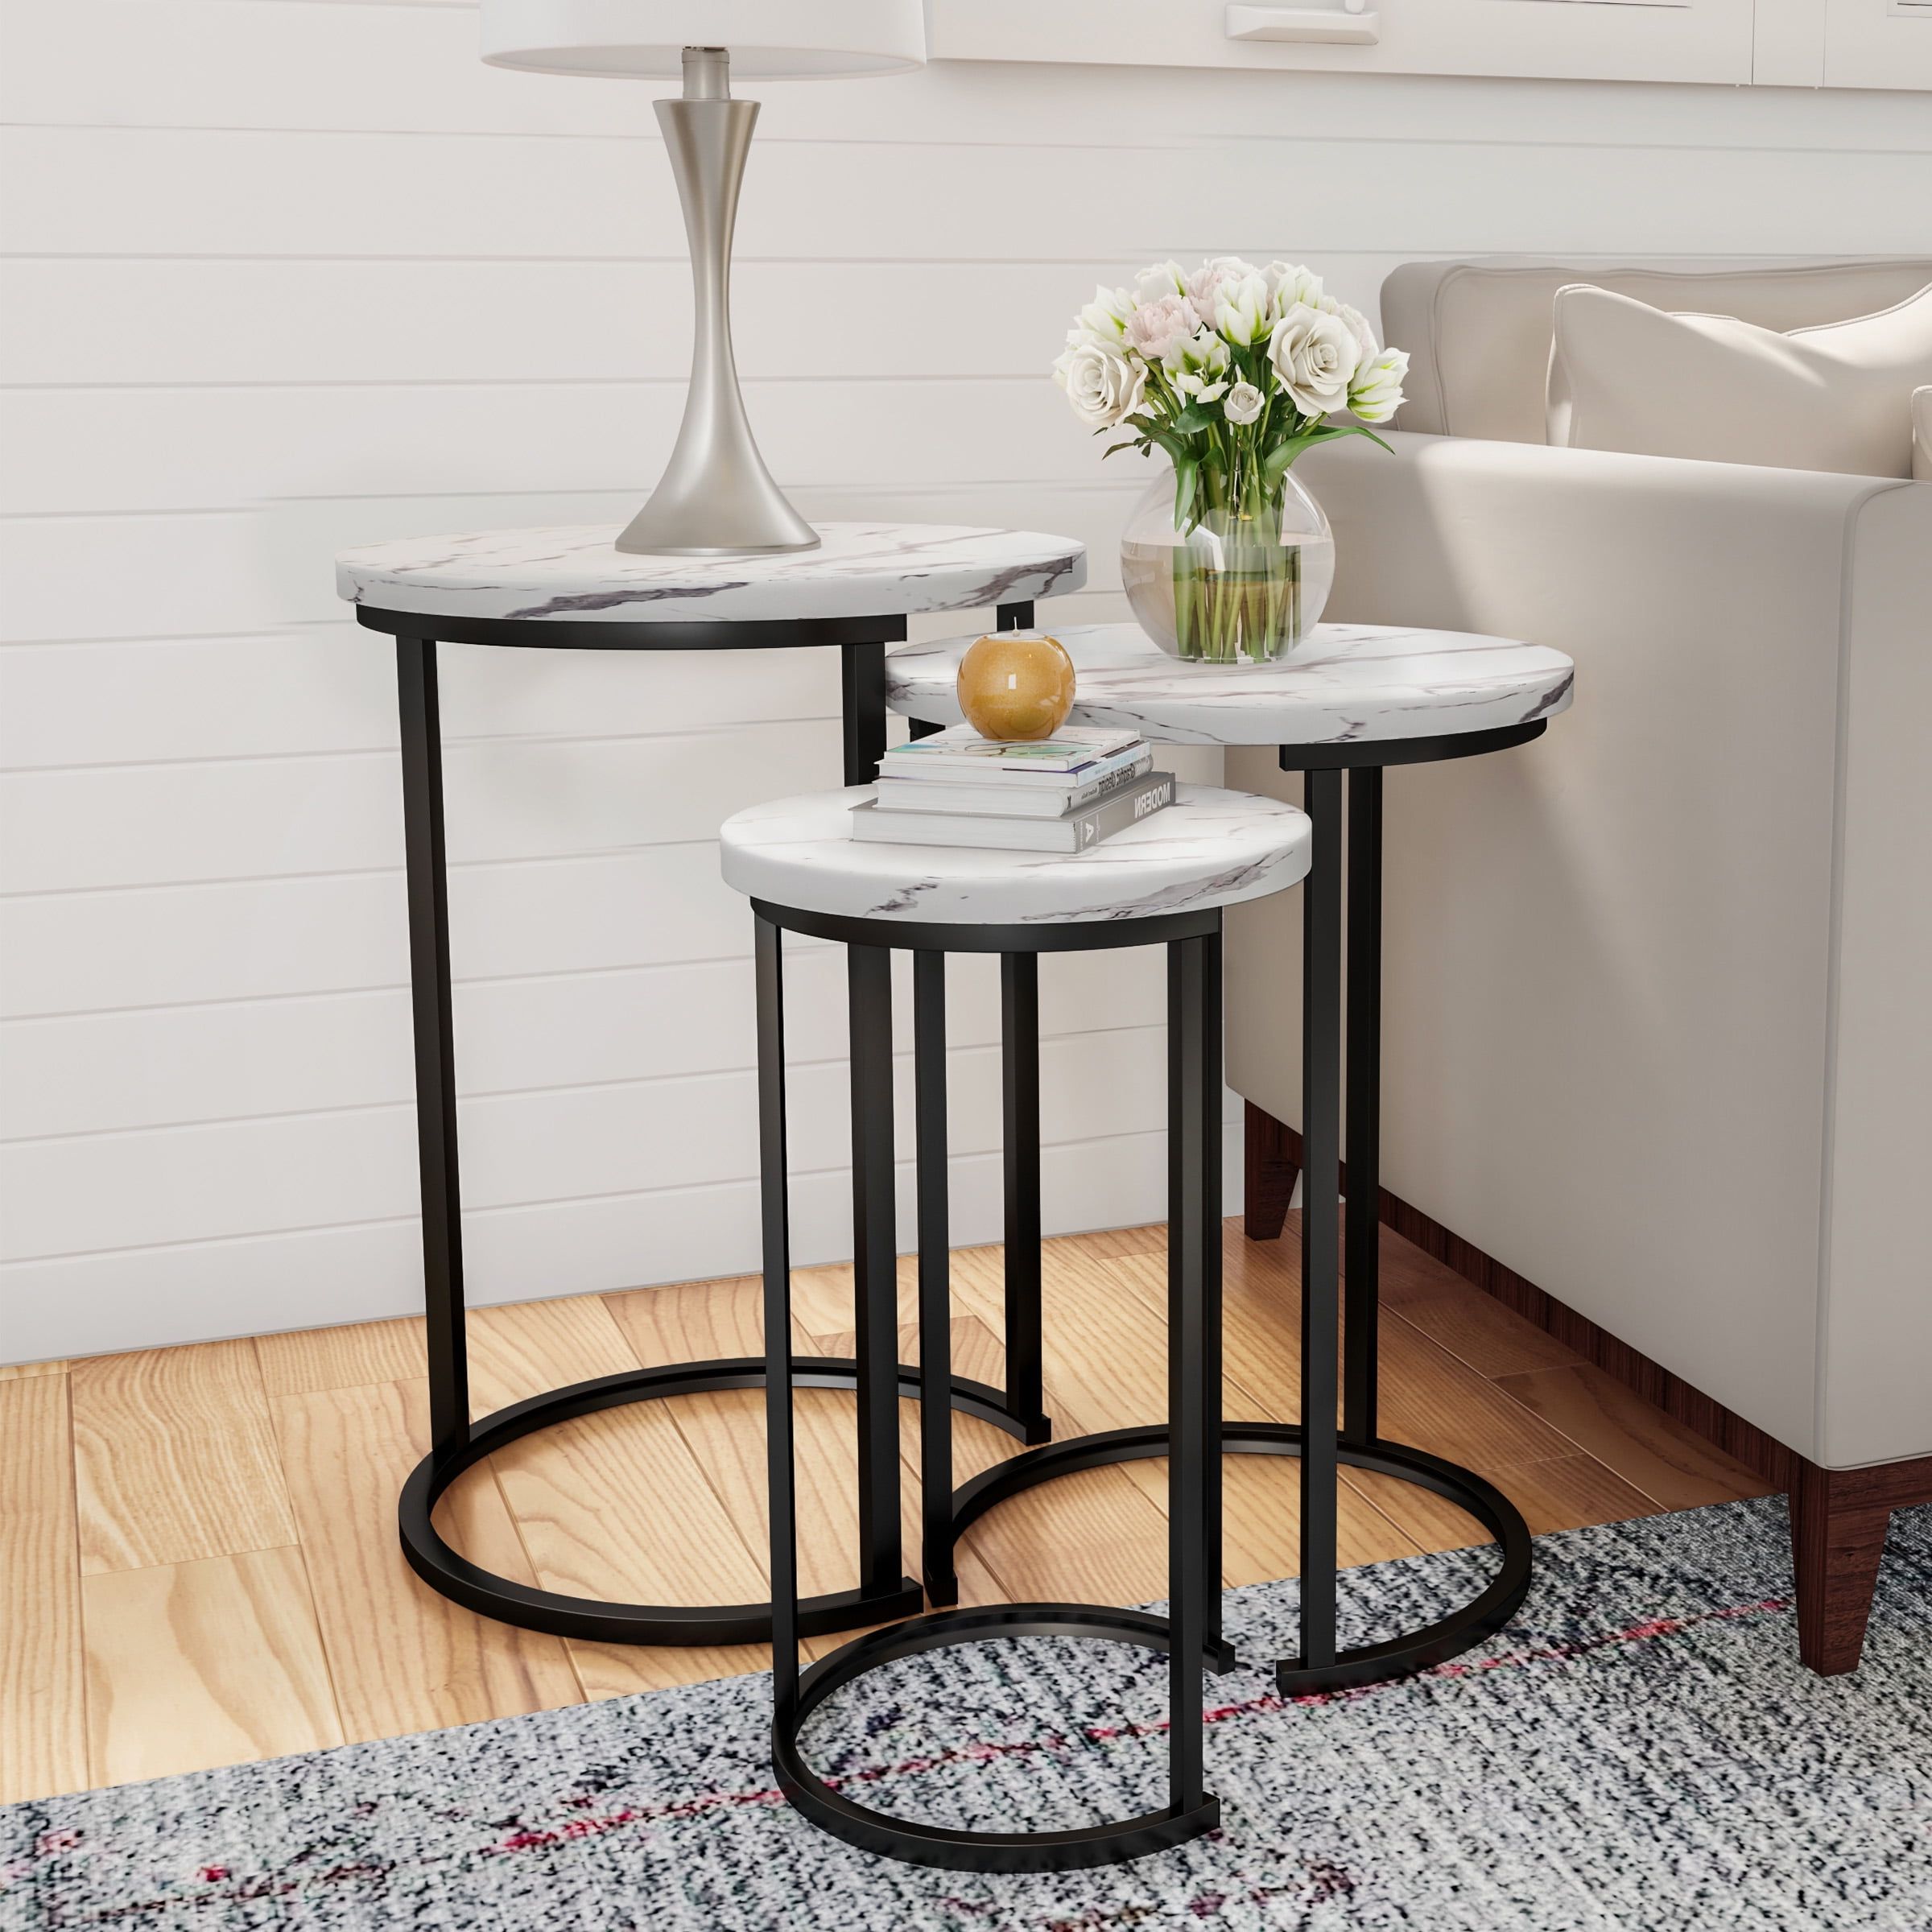 Somerset Home Nesting Tables – Accent Furniture Set Of 3, White Faux Marble  – Walmart Pertaining To Popular Coffee Tables Of 3 Nesting Tables (View 5 of 10)